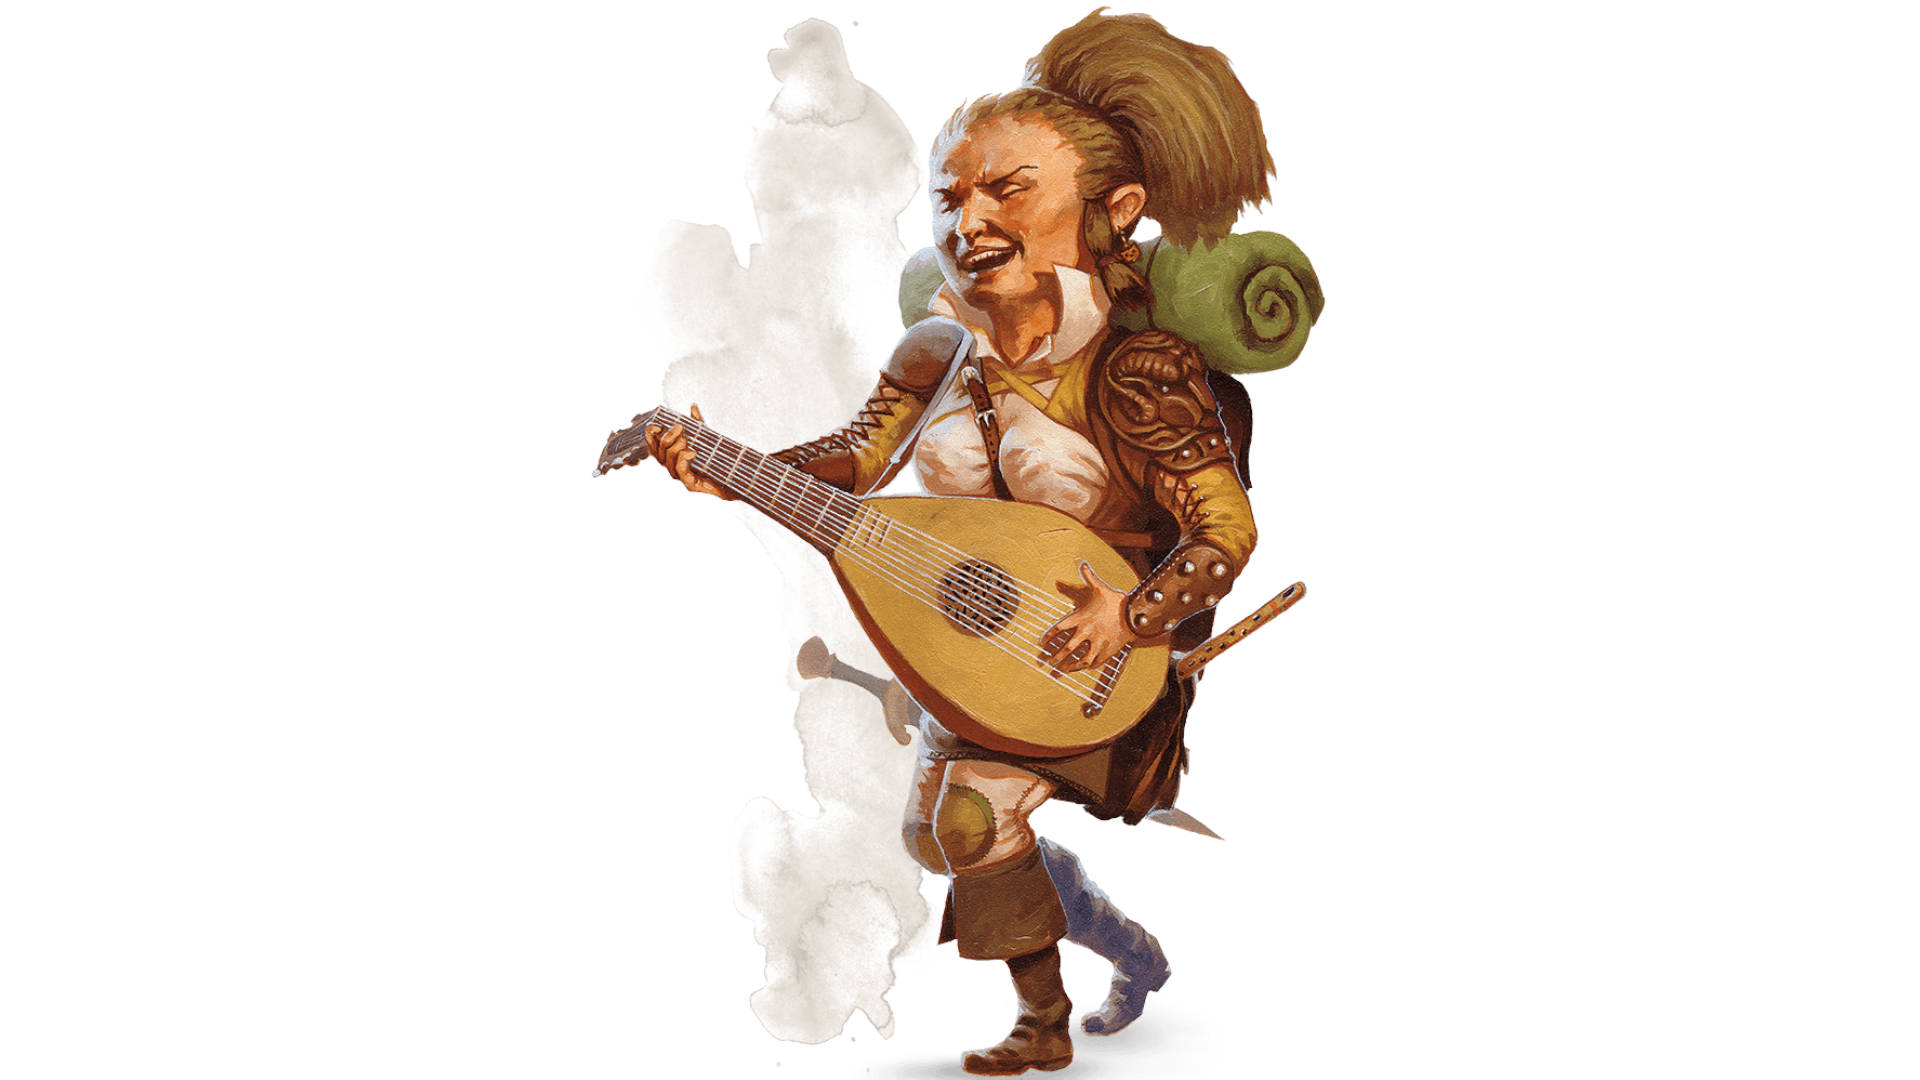 DnD Monk 5E - Wizards of the Coast art of a halfling Bard carrying a lute